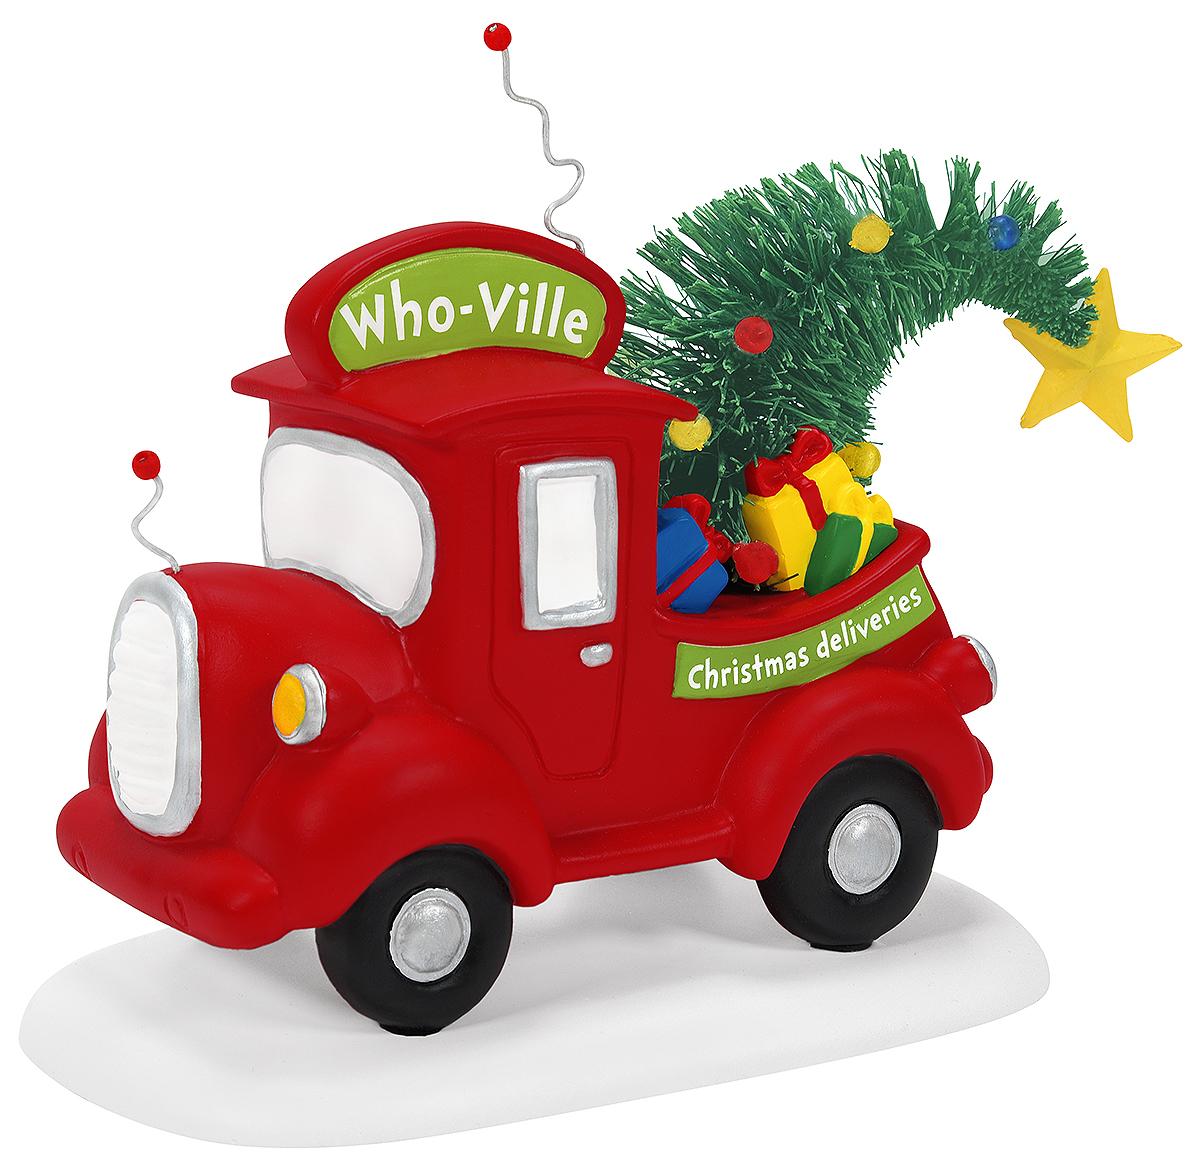 Who-Ville Christmas Deliveries